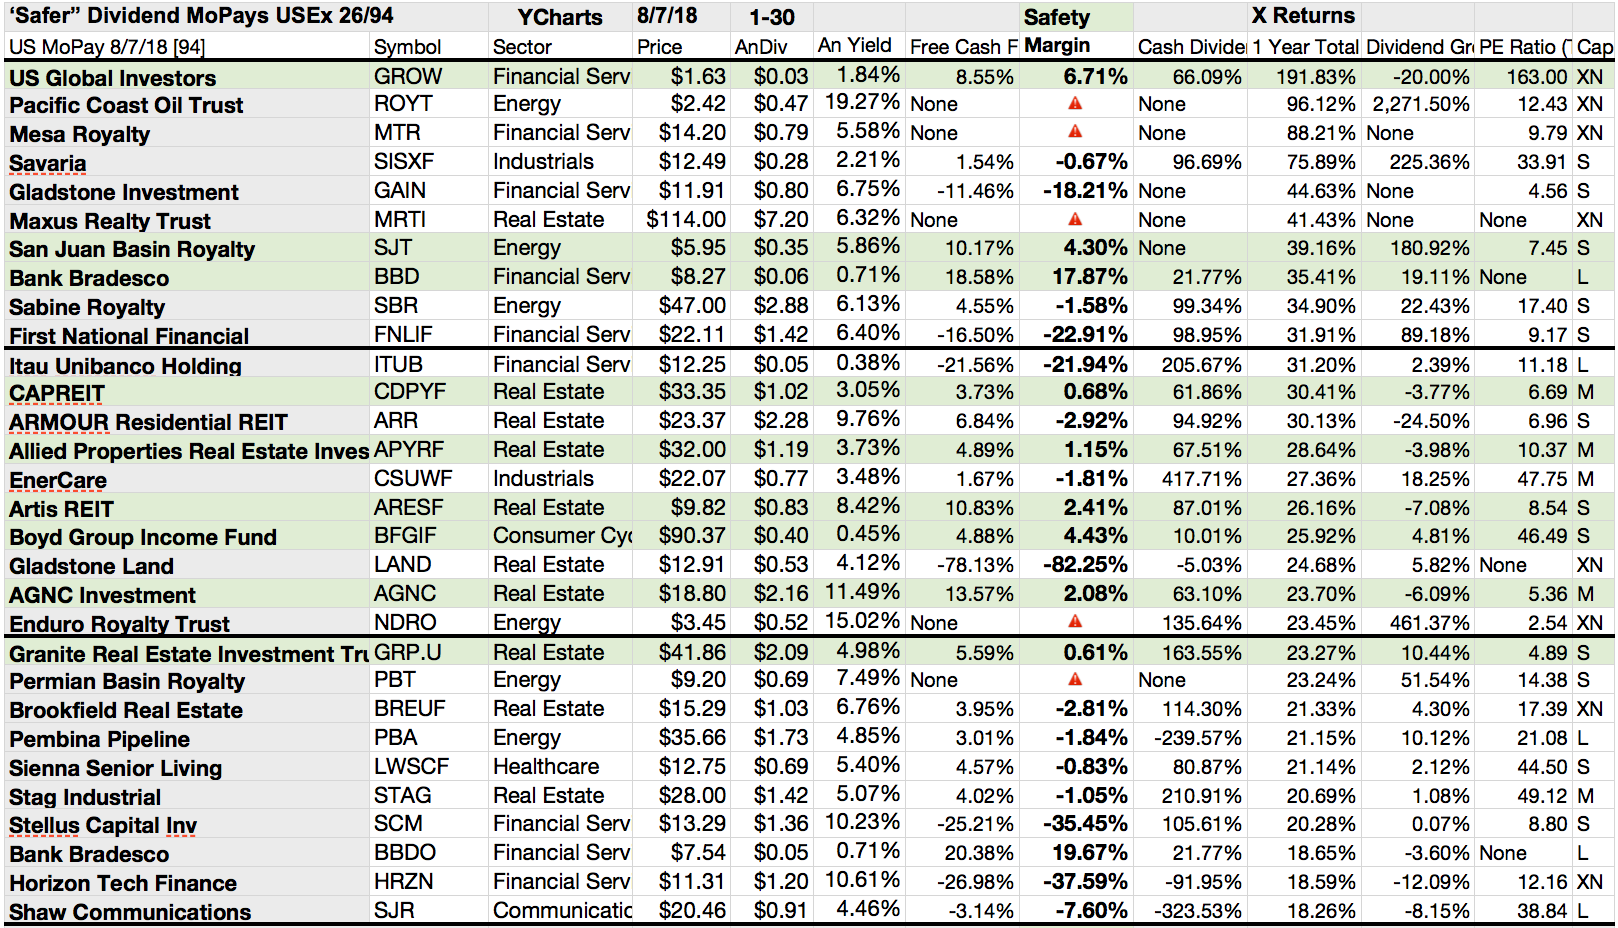 26 'Safer' Monthly Paid Dividend Equities Cover Their U.S. August ...